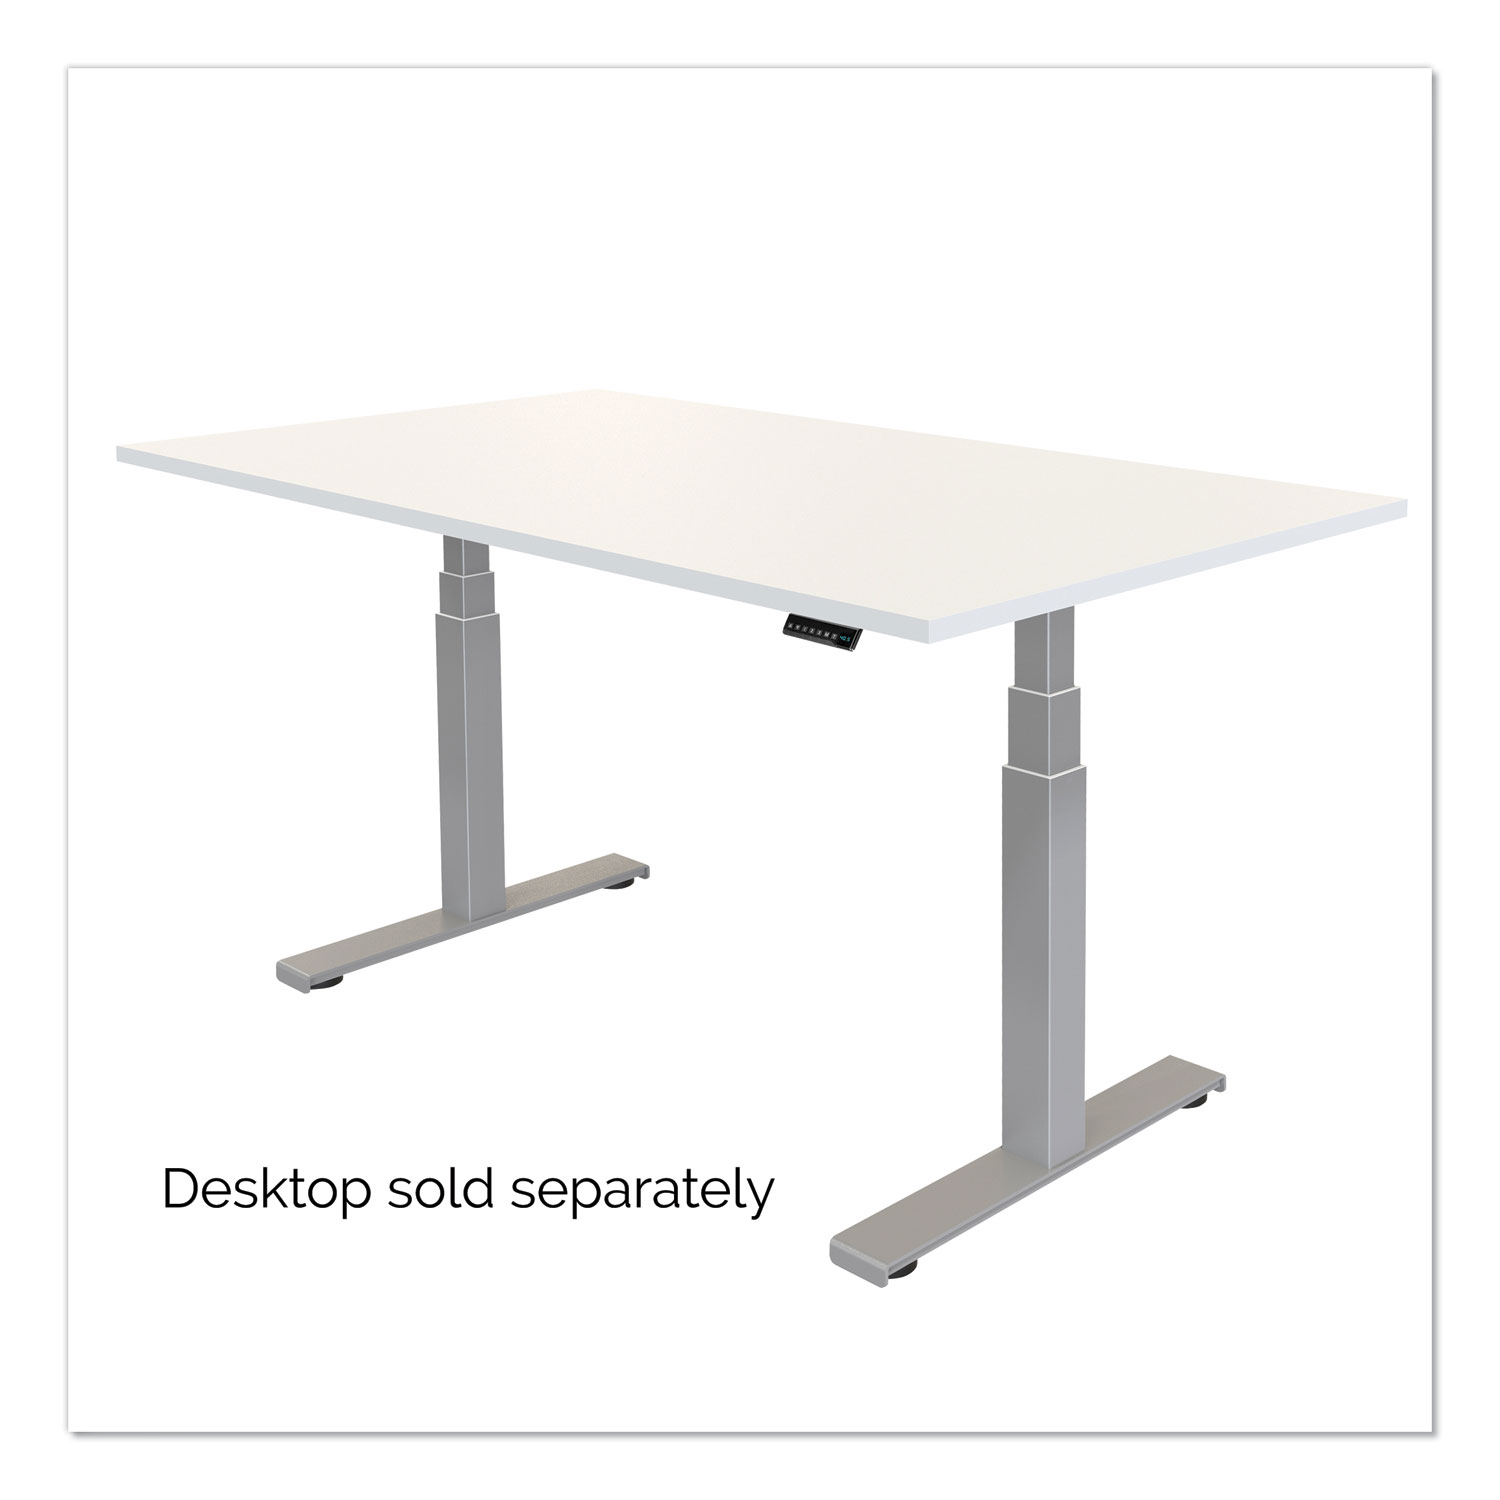  Fellowes 9682001 Cambio Height Adjustable Desk Base (Base Only), 72w x 30d x 50.25h, Silver (FEL9682001) 